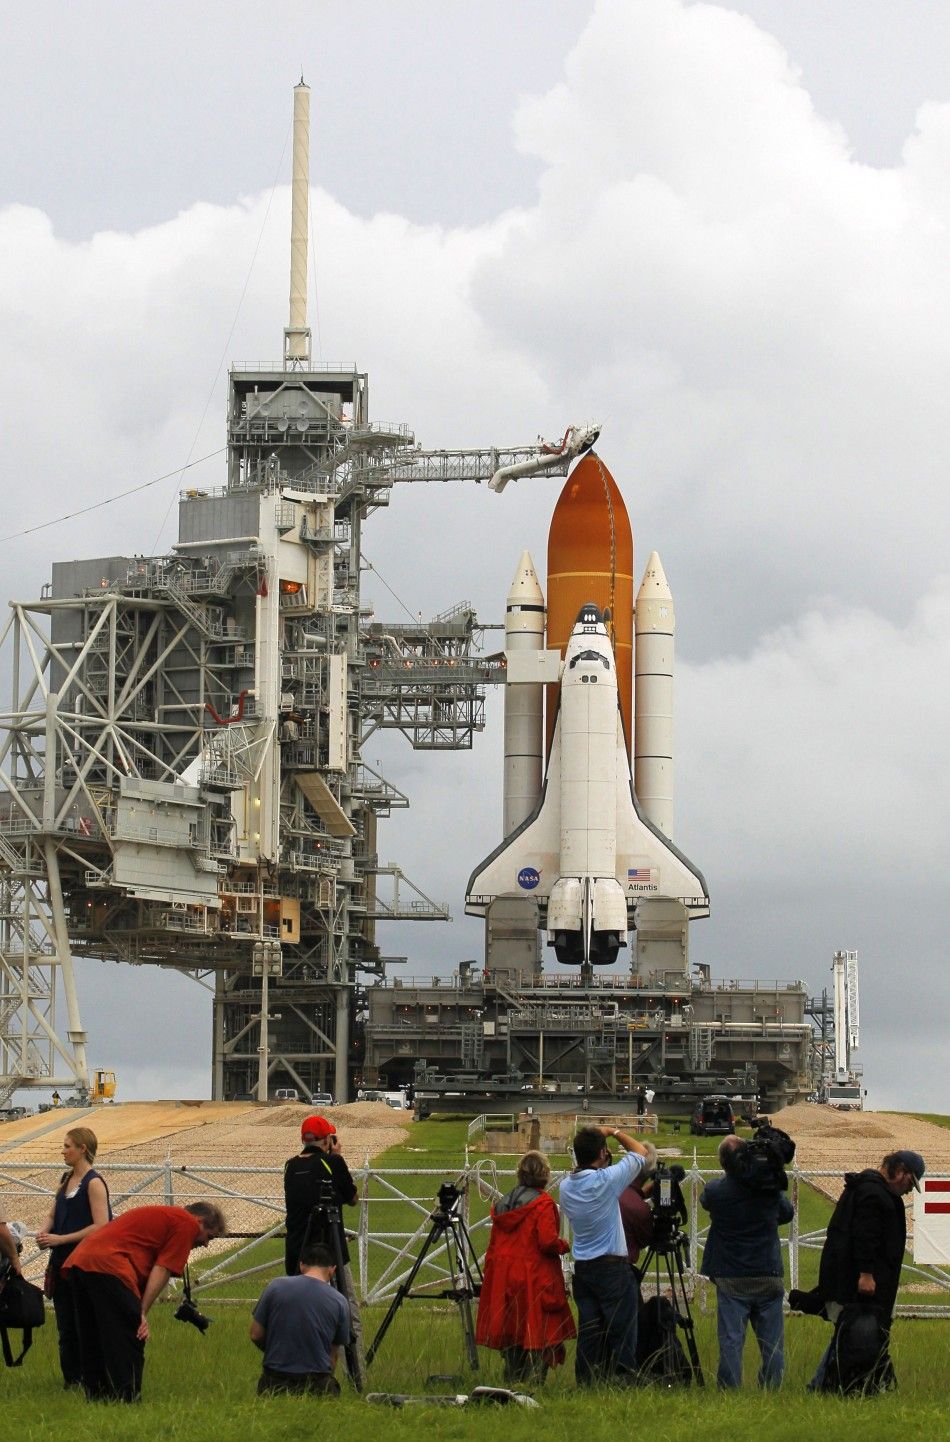 The space shuttle Atlantis is shown on launch pad 39A after the Rotating Service Structure was rolled back at the Kennedy Space Center in Cape Canaveral